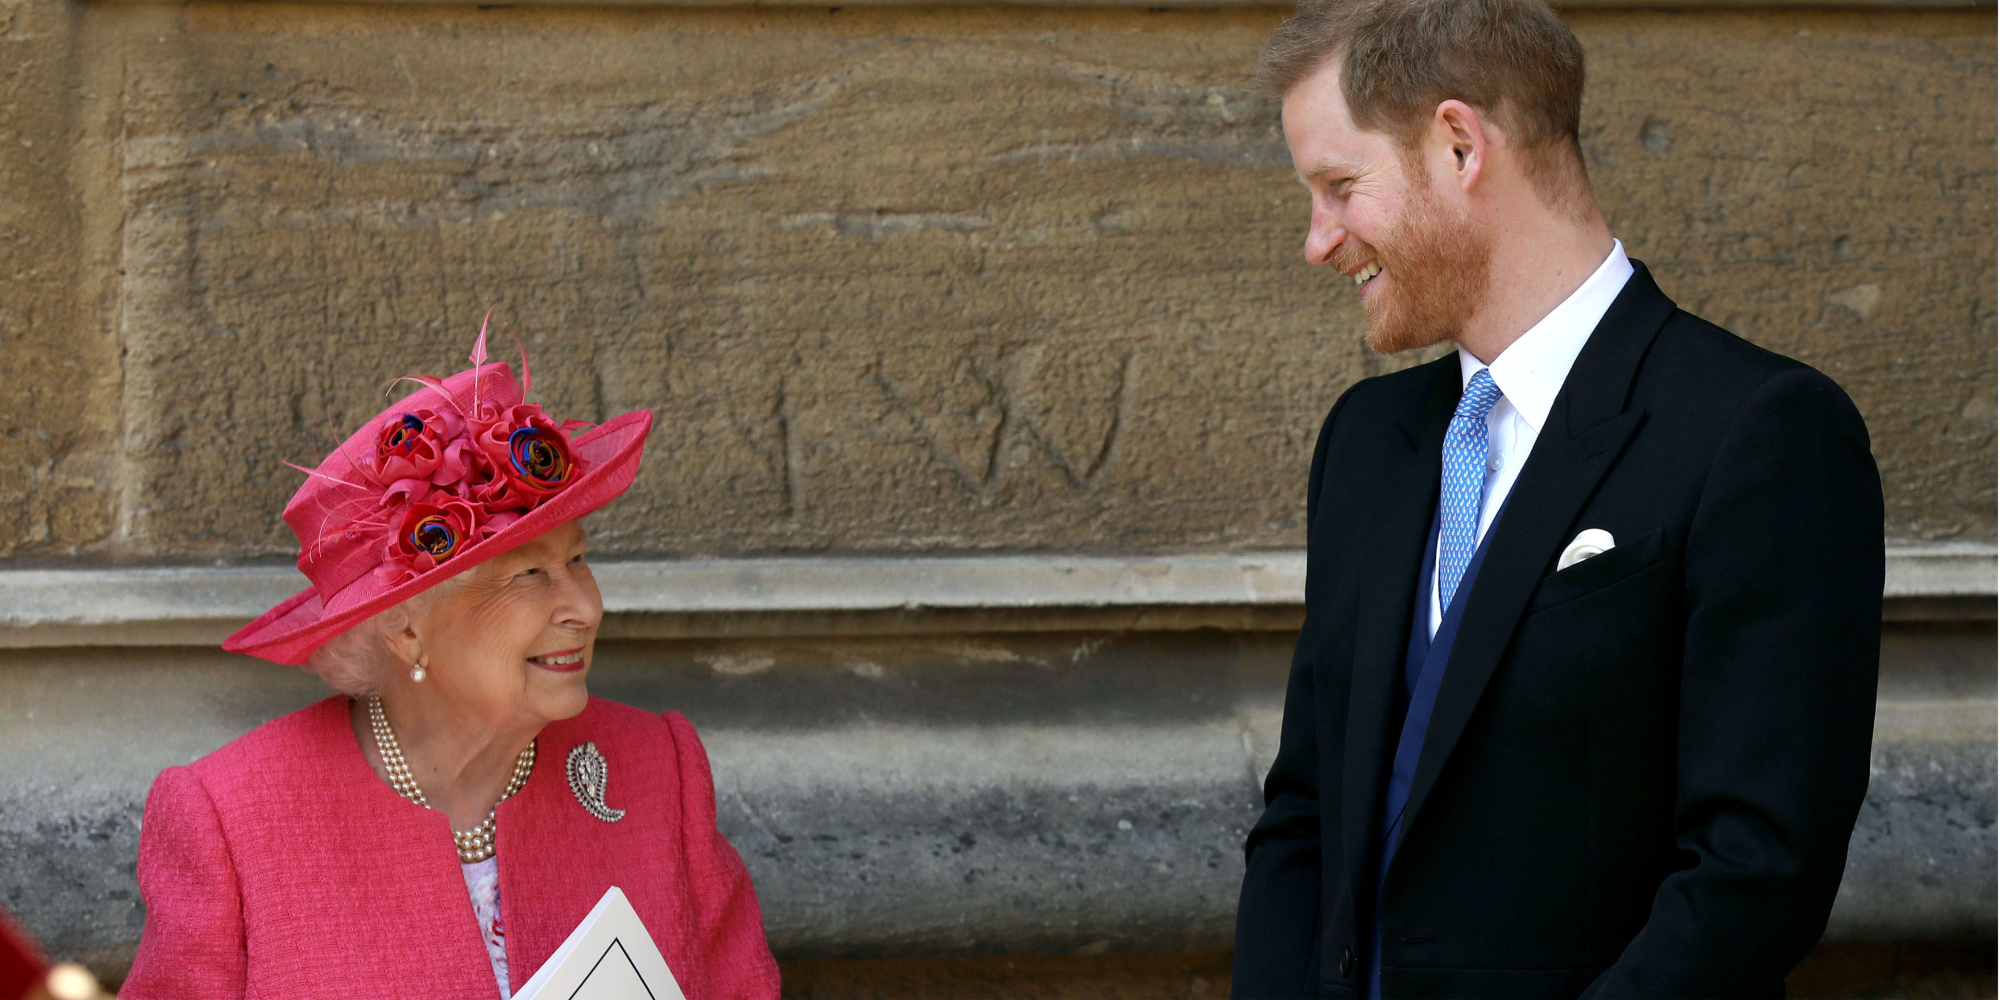 Prince Harry’s First Statement to ‘Granny’ After Queen Elizabeth’s Death Honors Her ‘Infectious Smile’ and ‘Sound Advice’